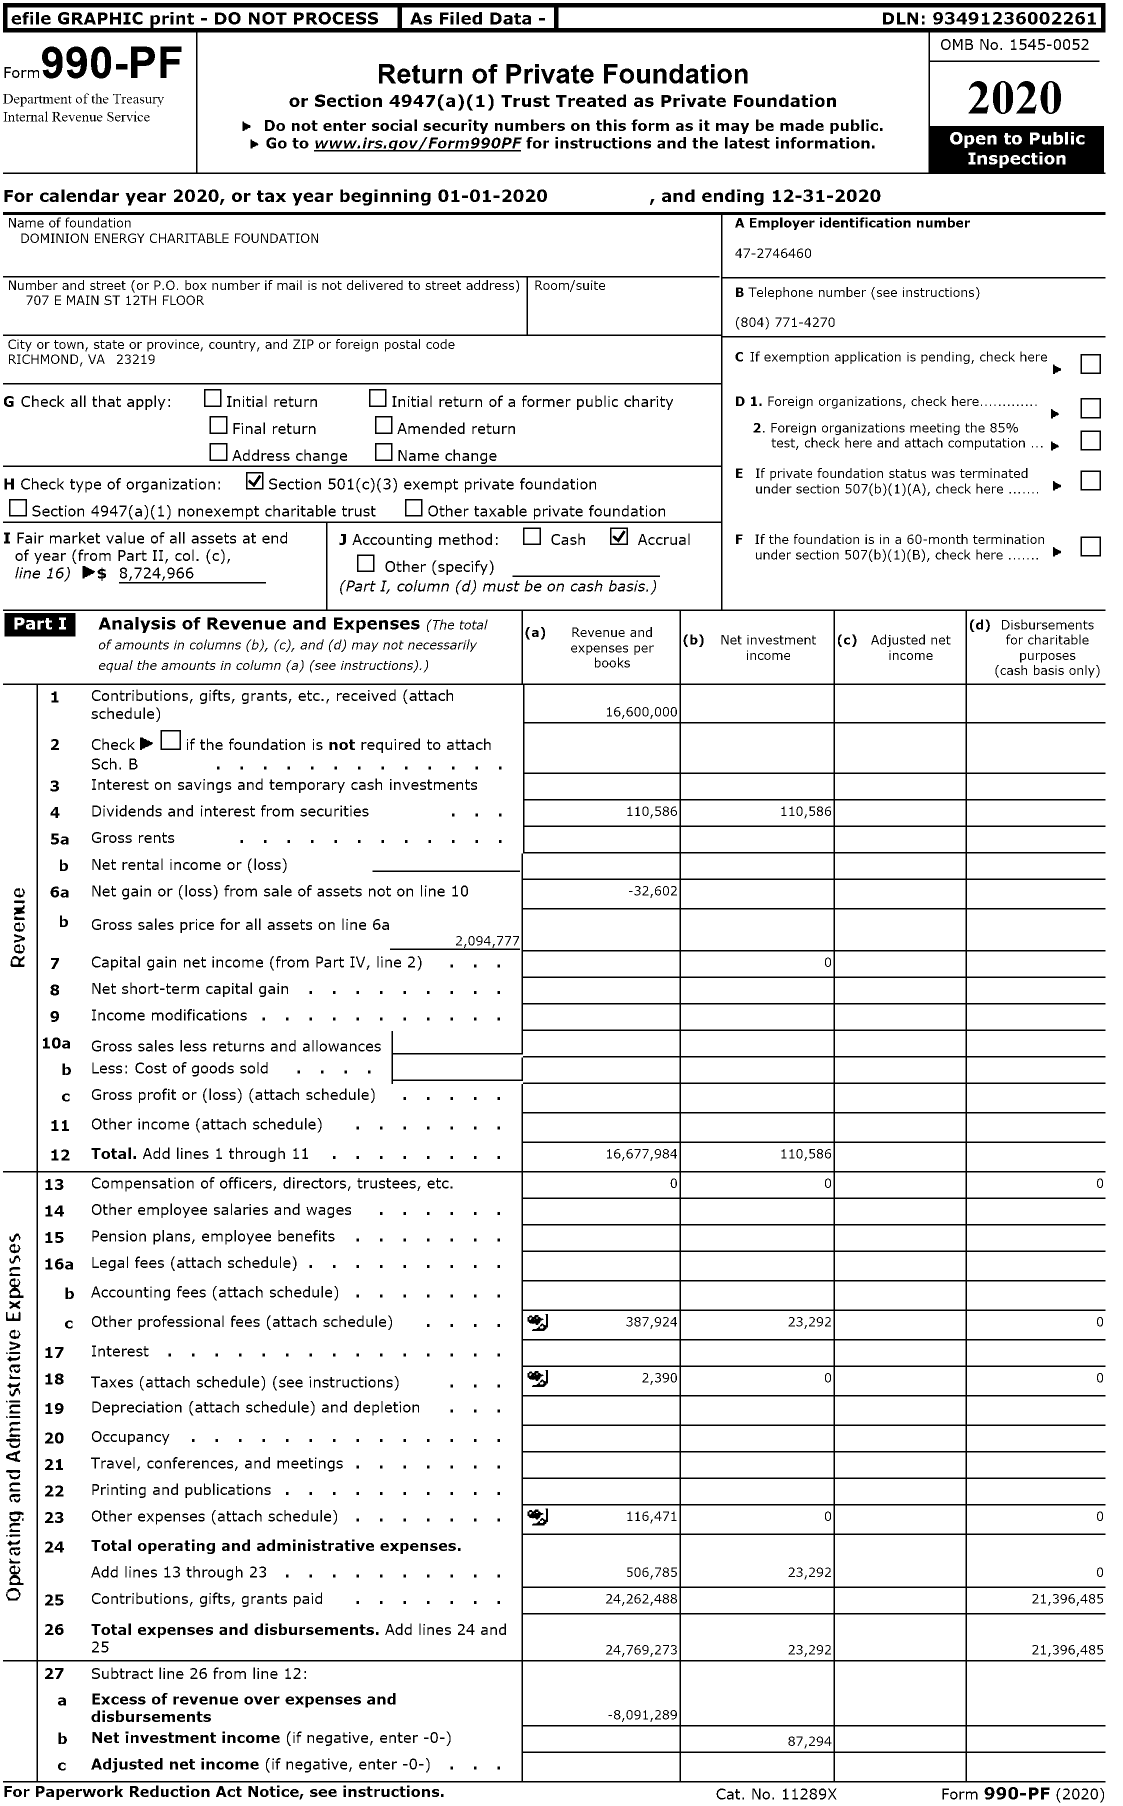 2020 Form 990 For Dominion Energy Charitable Foundation Cause IQ